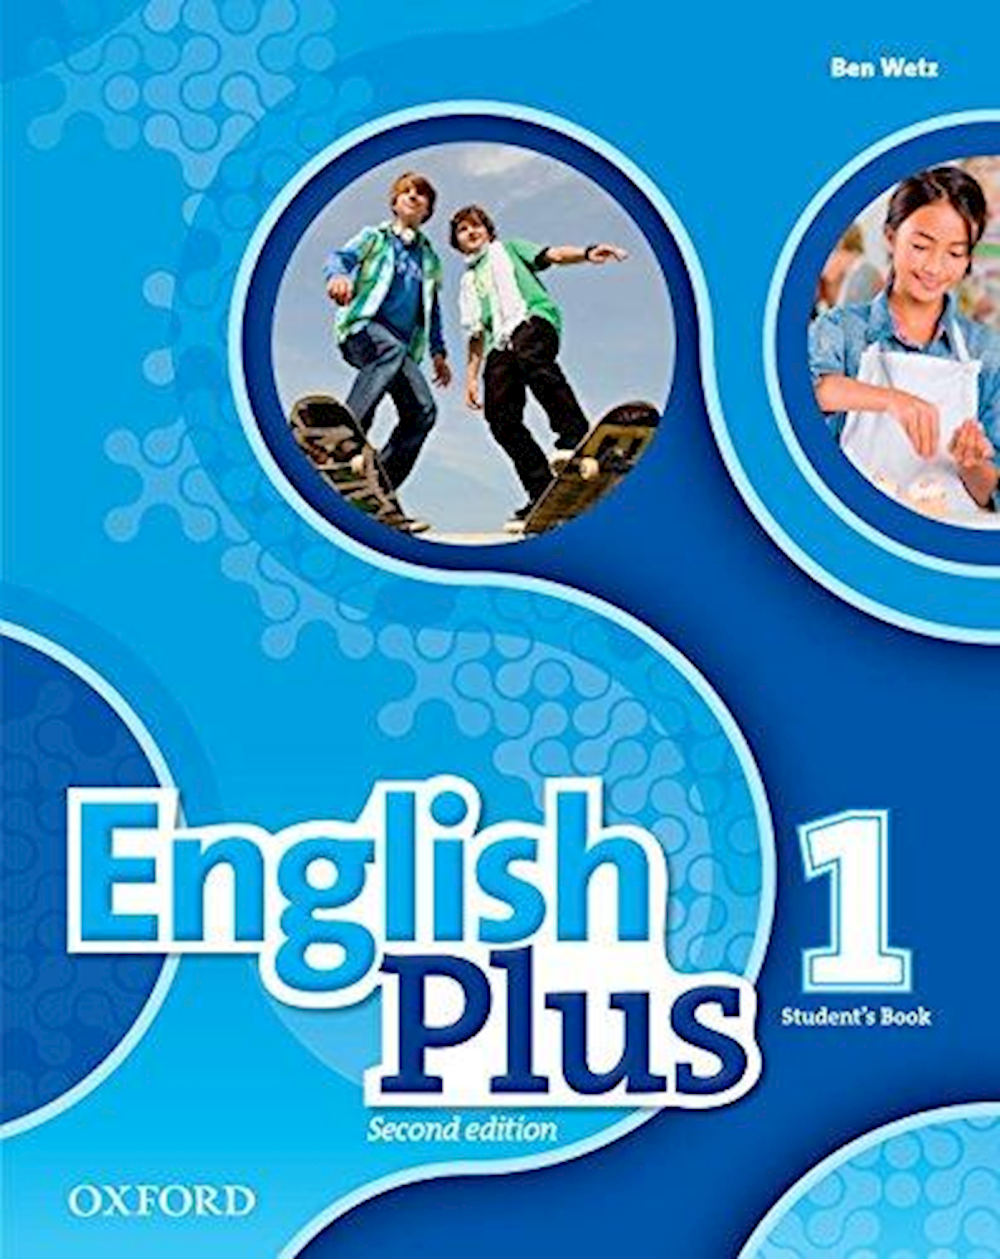 English Plus 1 Second Edition Student's Book and e